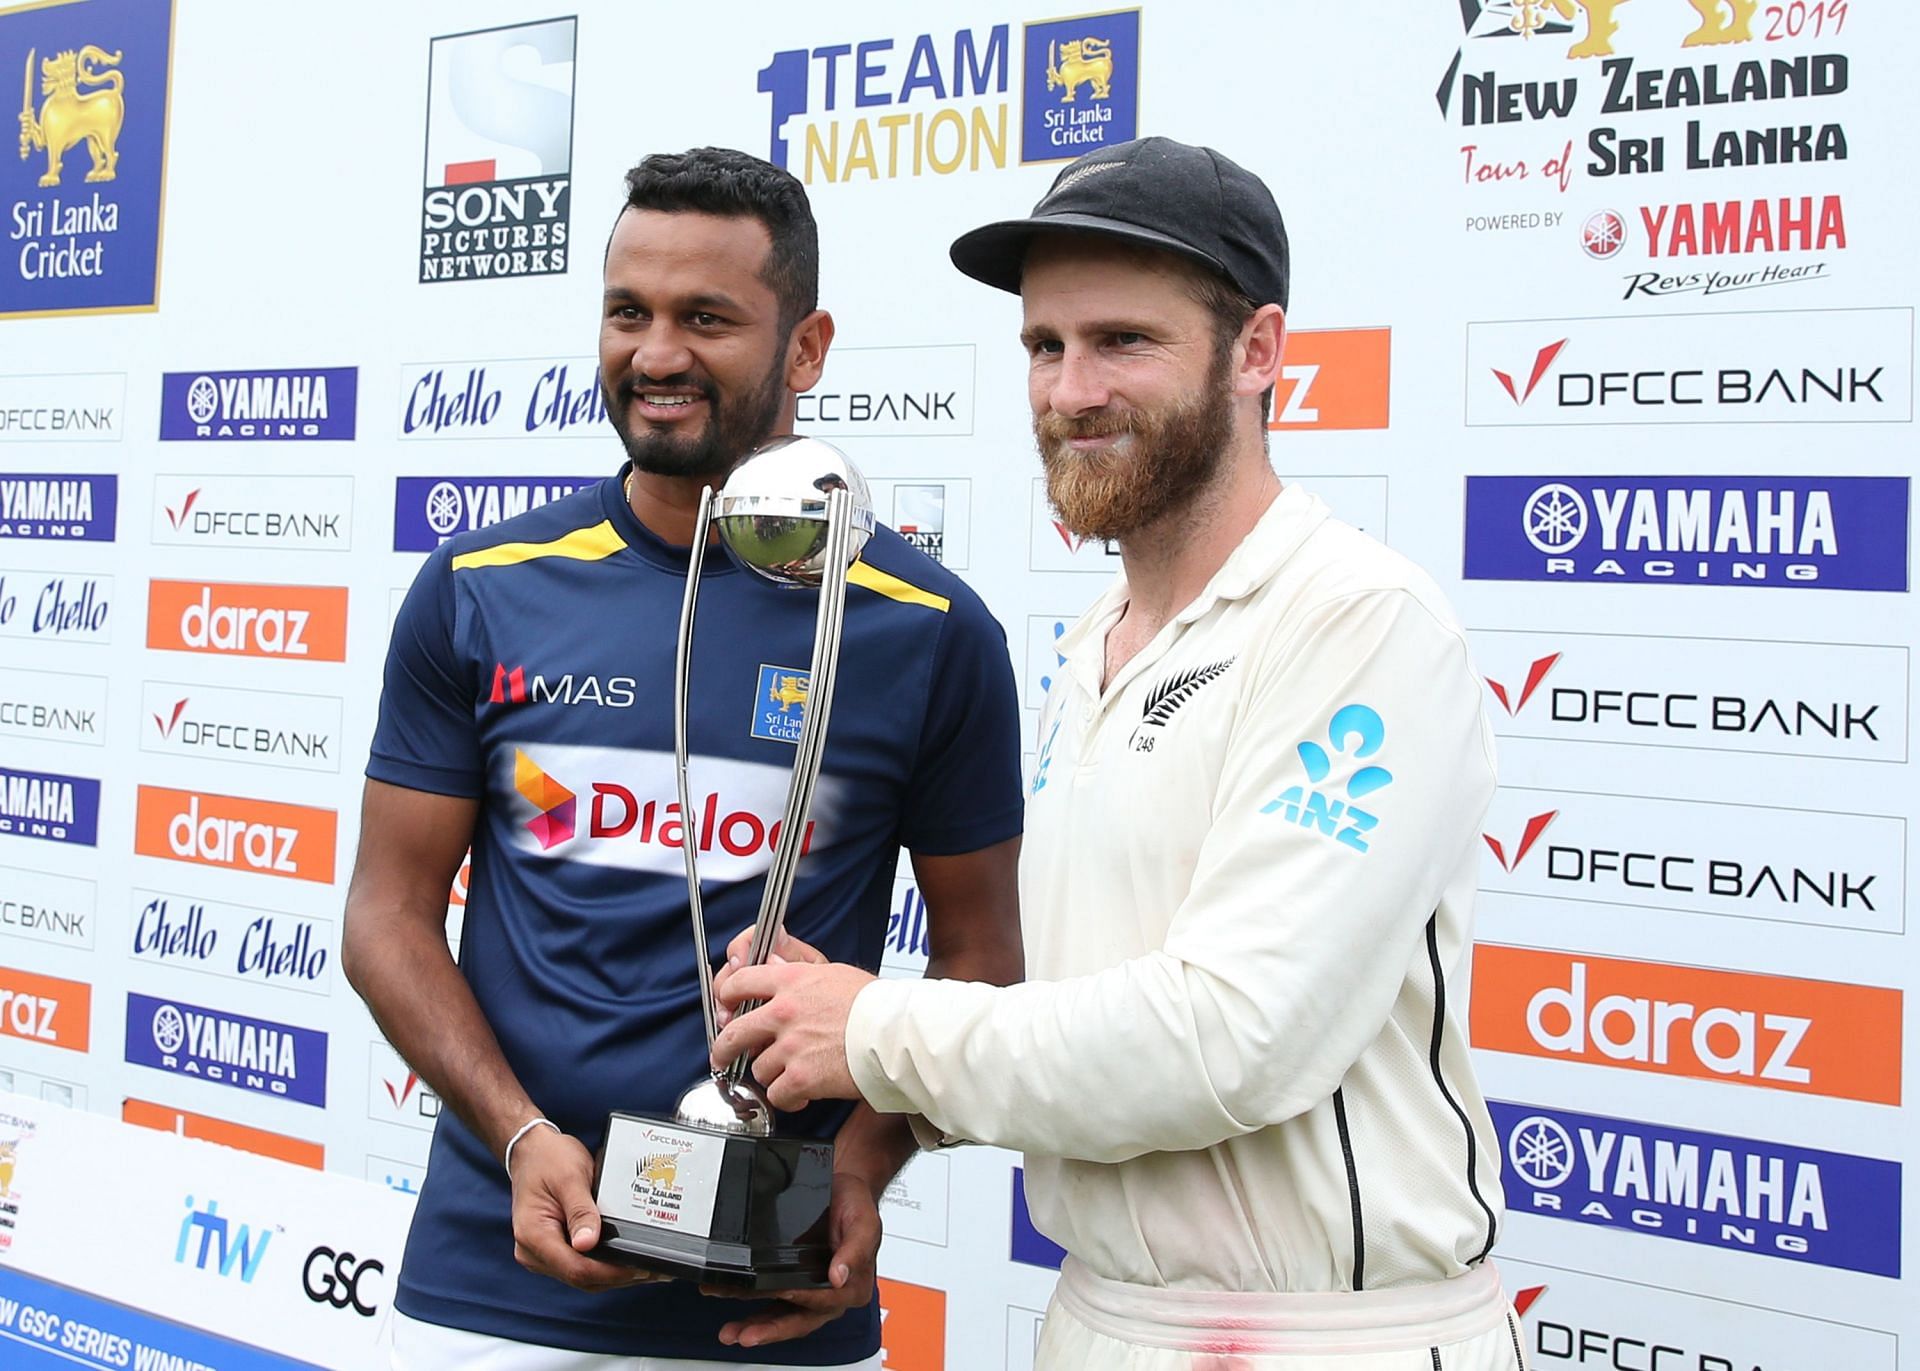 Sri Lanka will visit New Zealand for a two-match Test series.